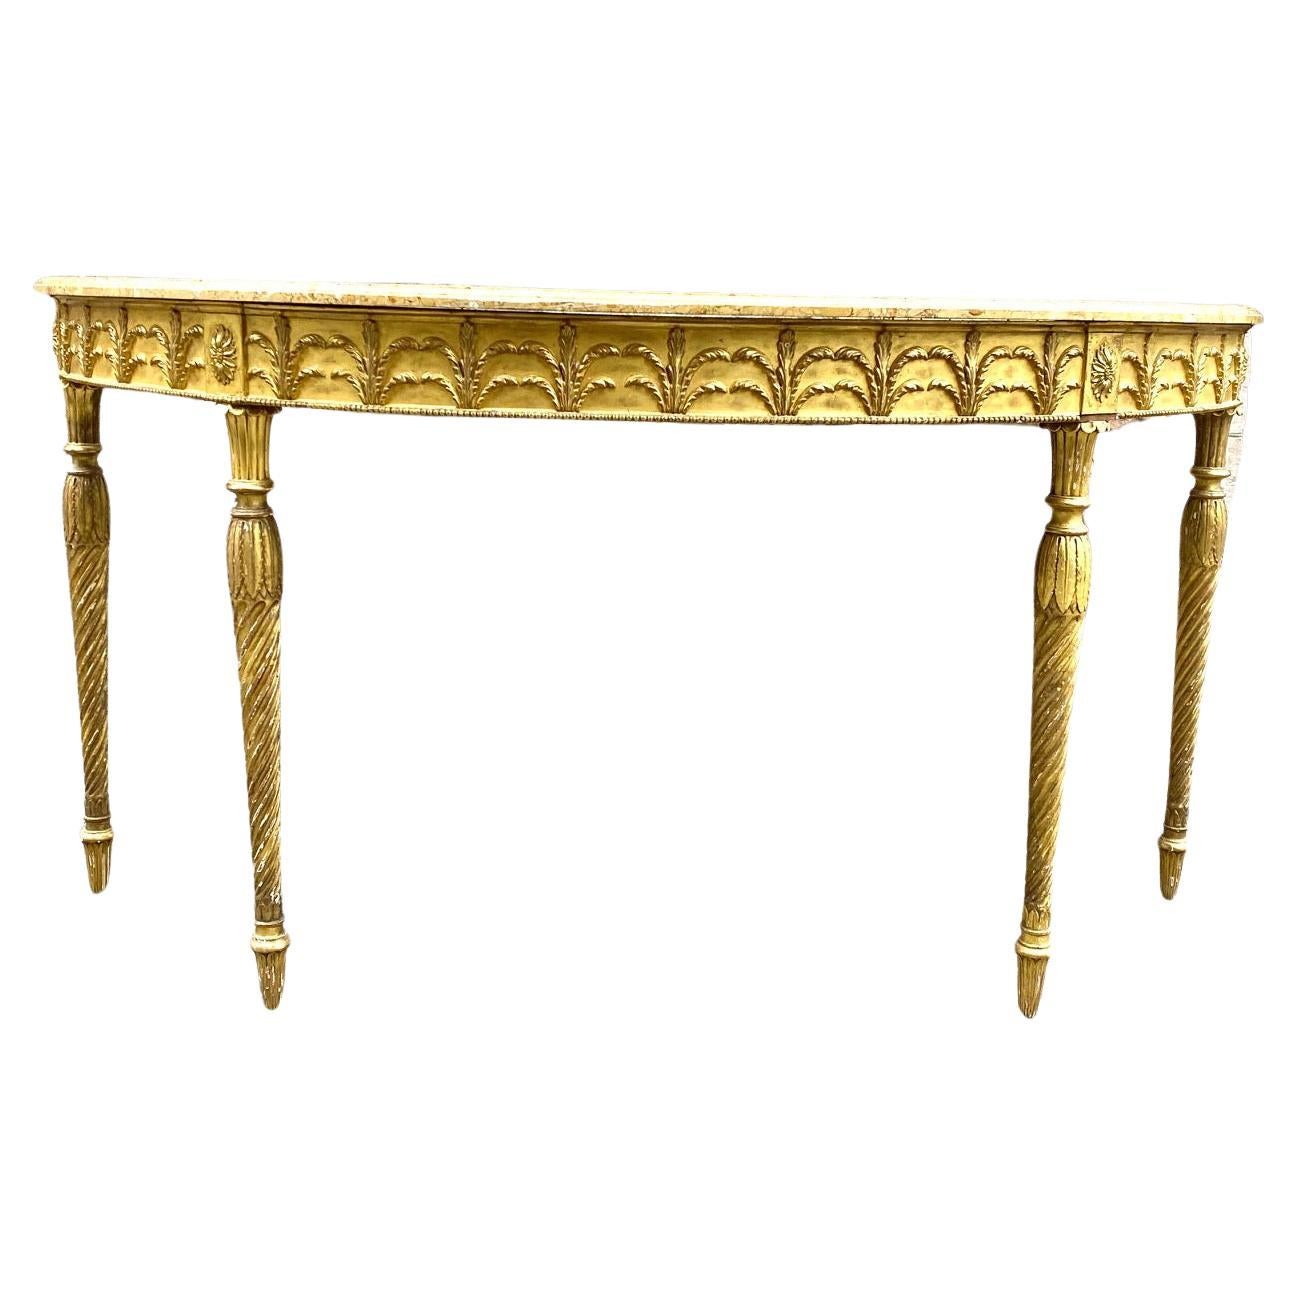 Rare Giltwood Adam Period Demi Lune Console Table with Sienna Marble Top